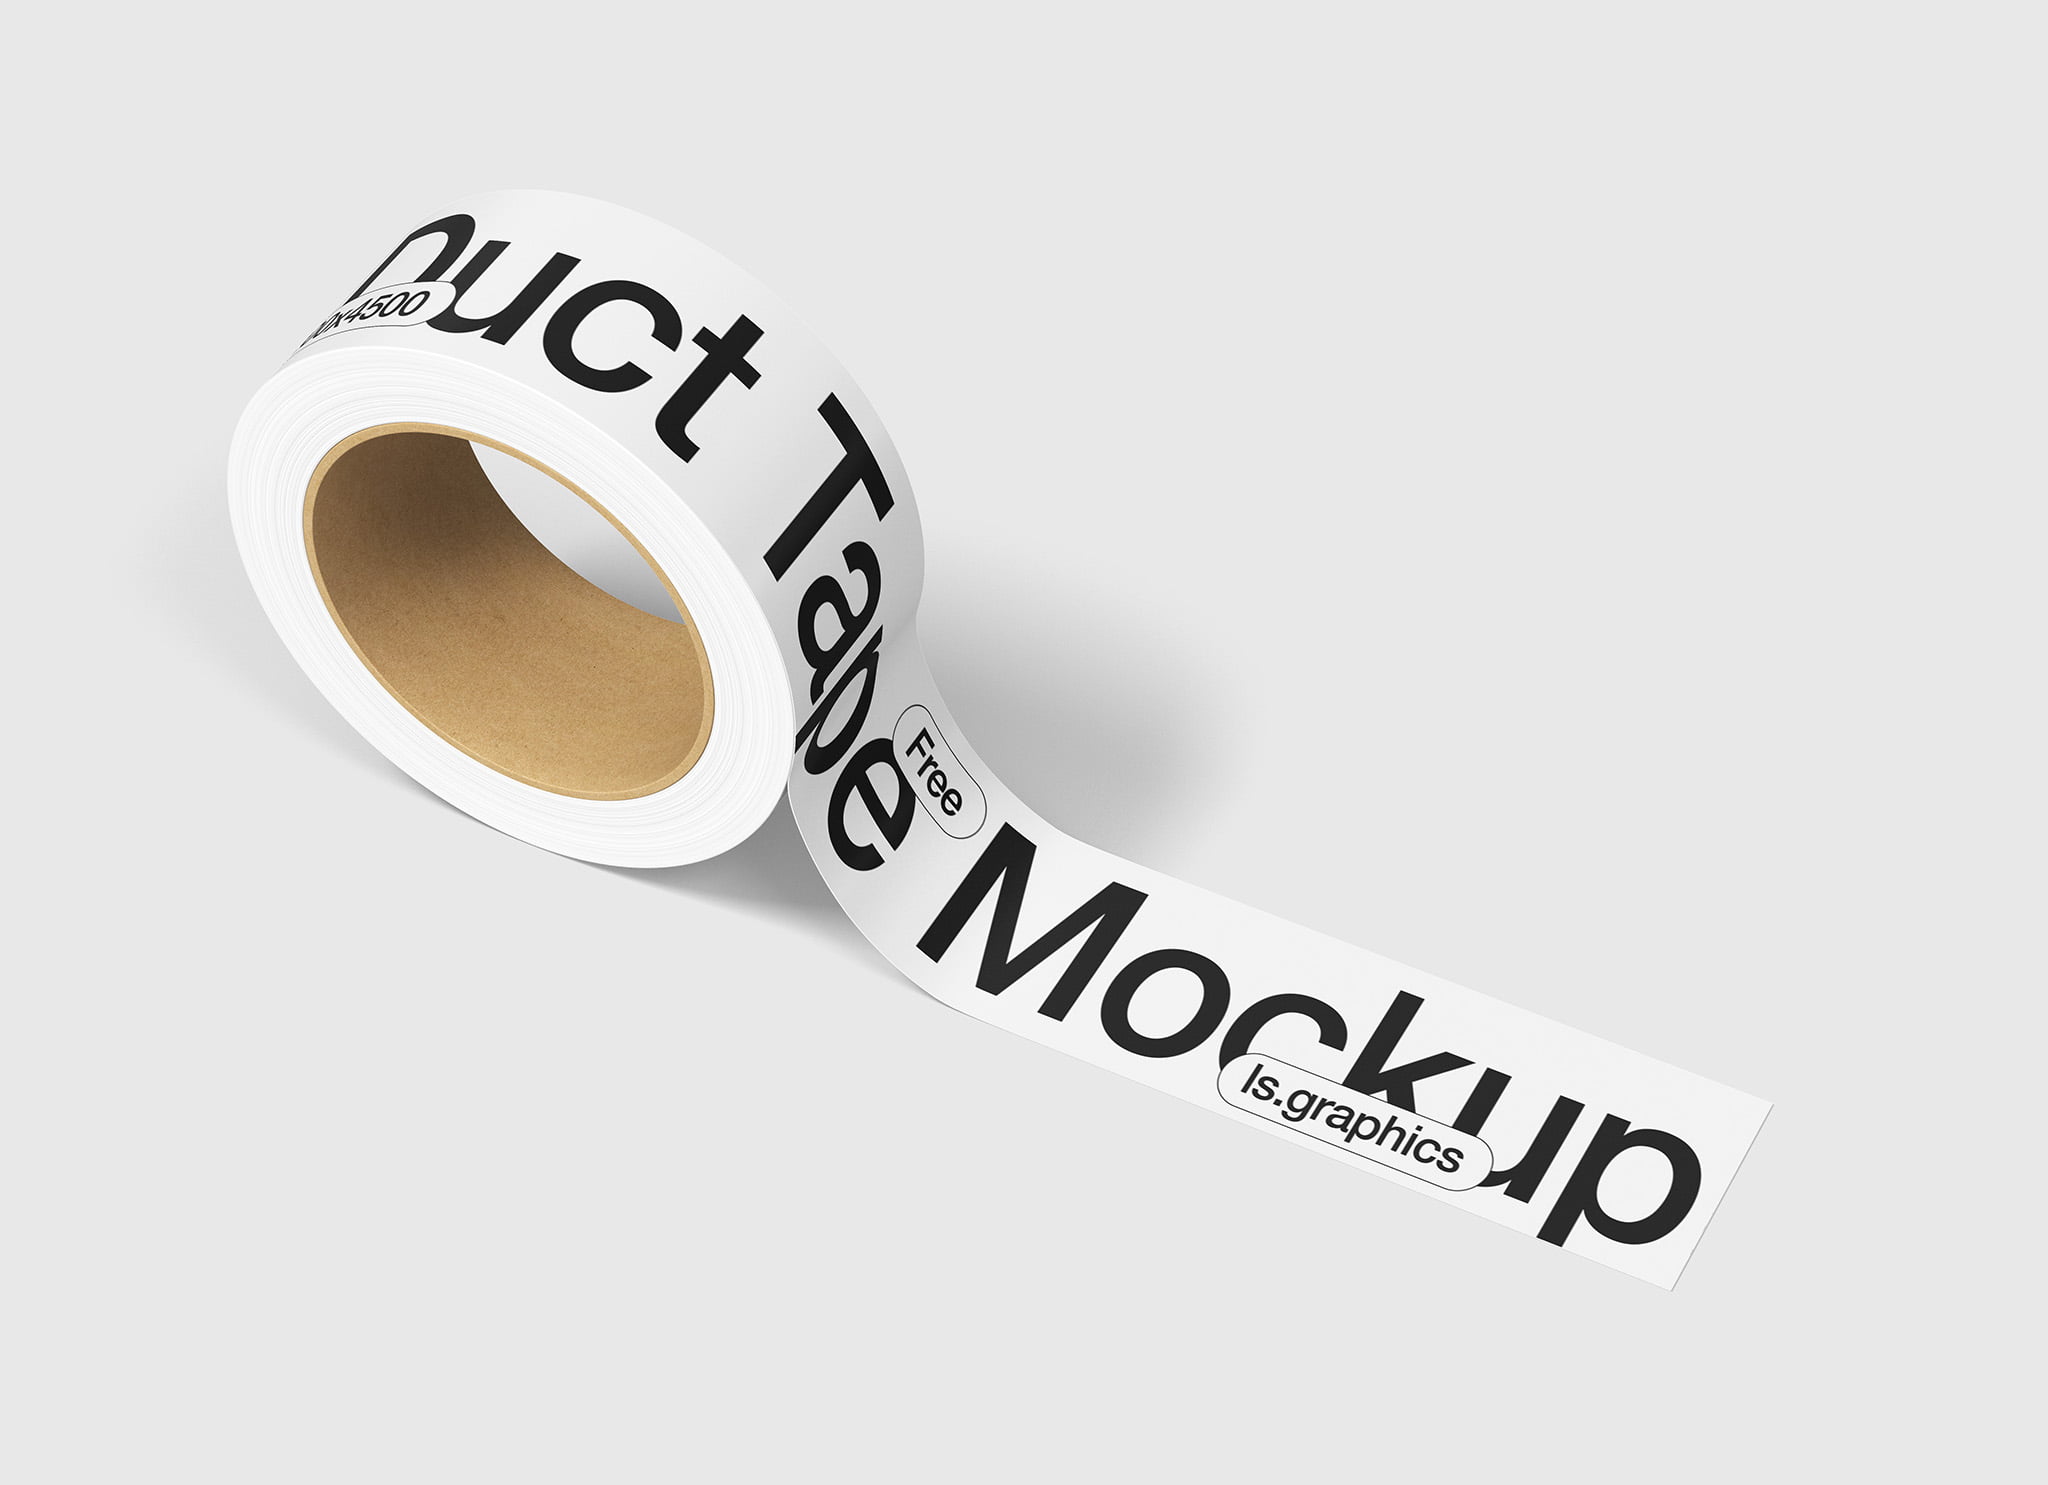 Download Duct Tape Mockup - GraphicsBunker